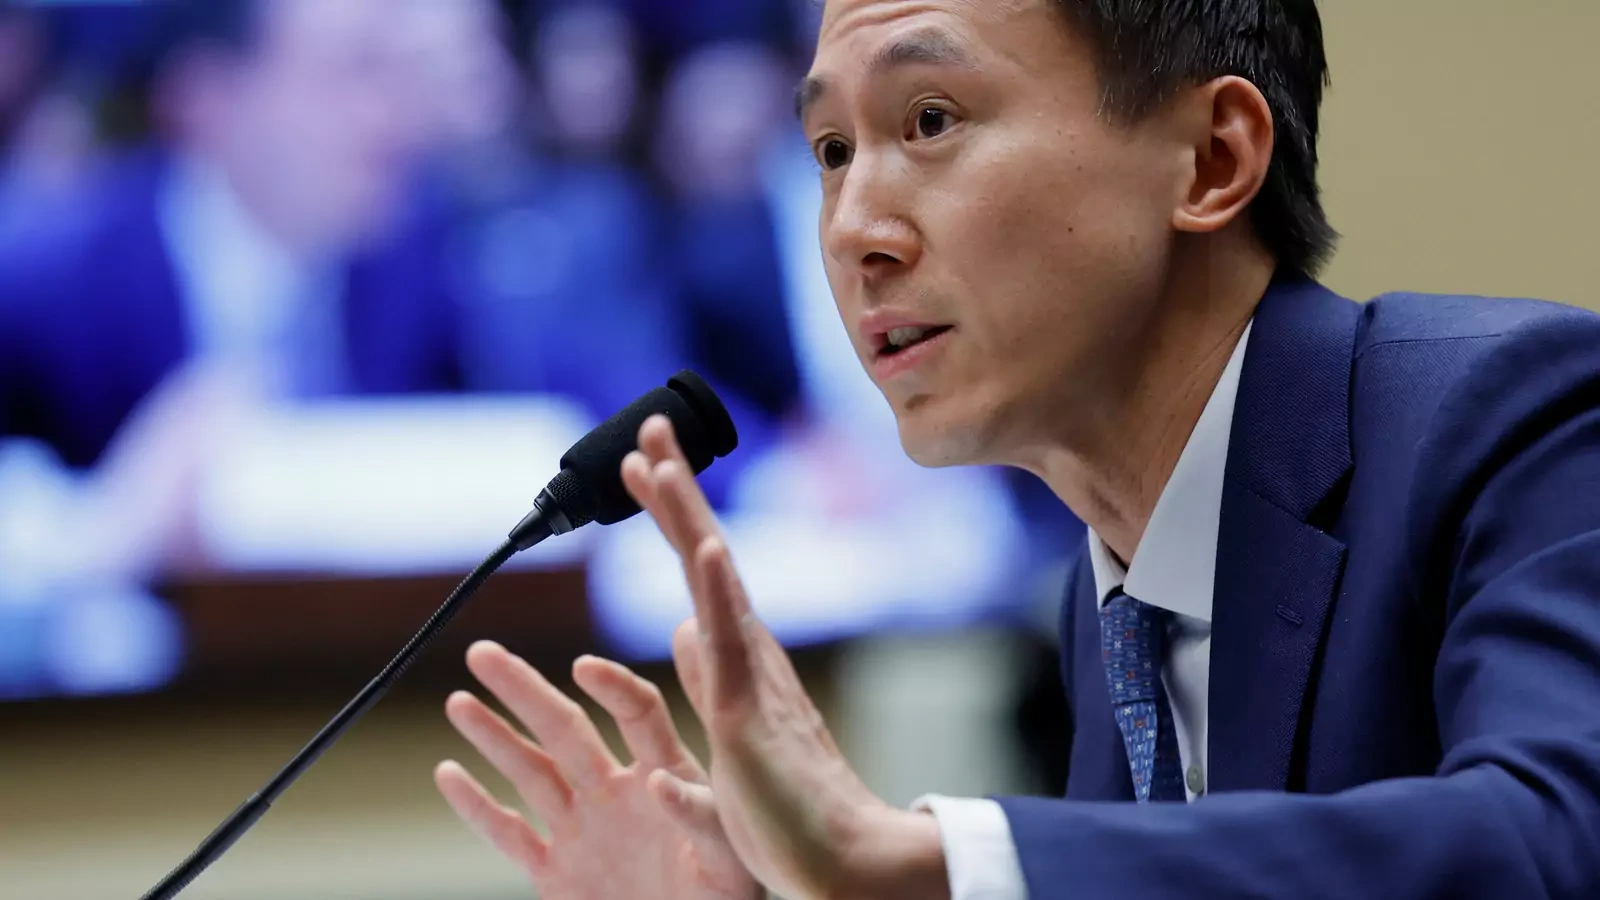 TikTok Chief Executive Shou Zi Chew testifies before a House Energy and Commerce Committee hearing entitled "TikTok: How Congress can Safeguard American Data Privacy and Protect Children from Online Harms," in Washington on March 23, 2023.